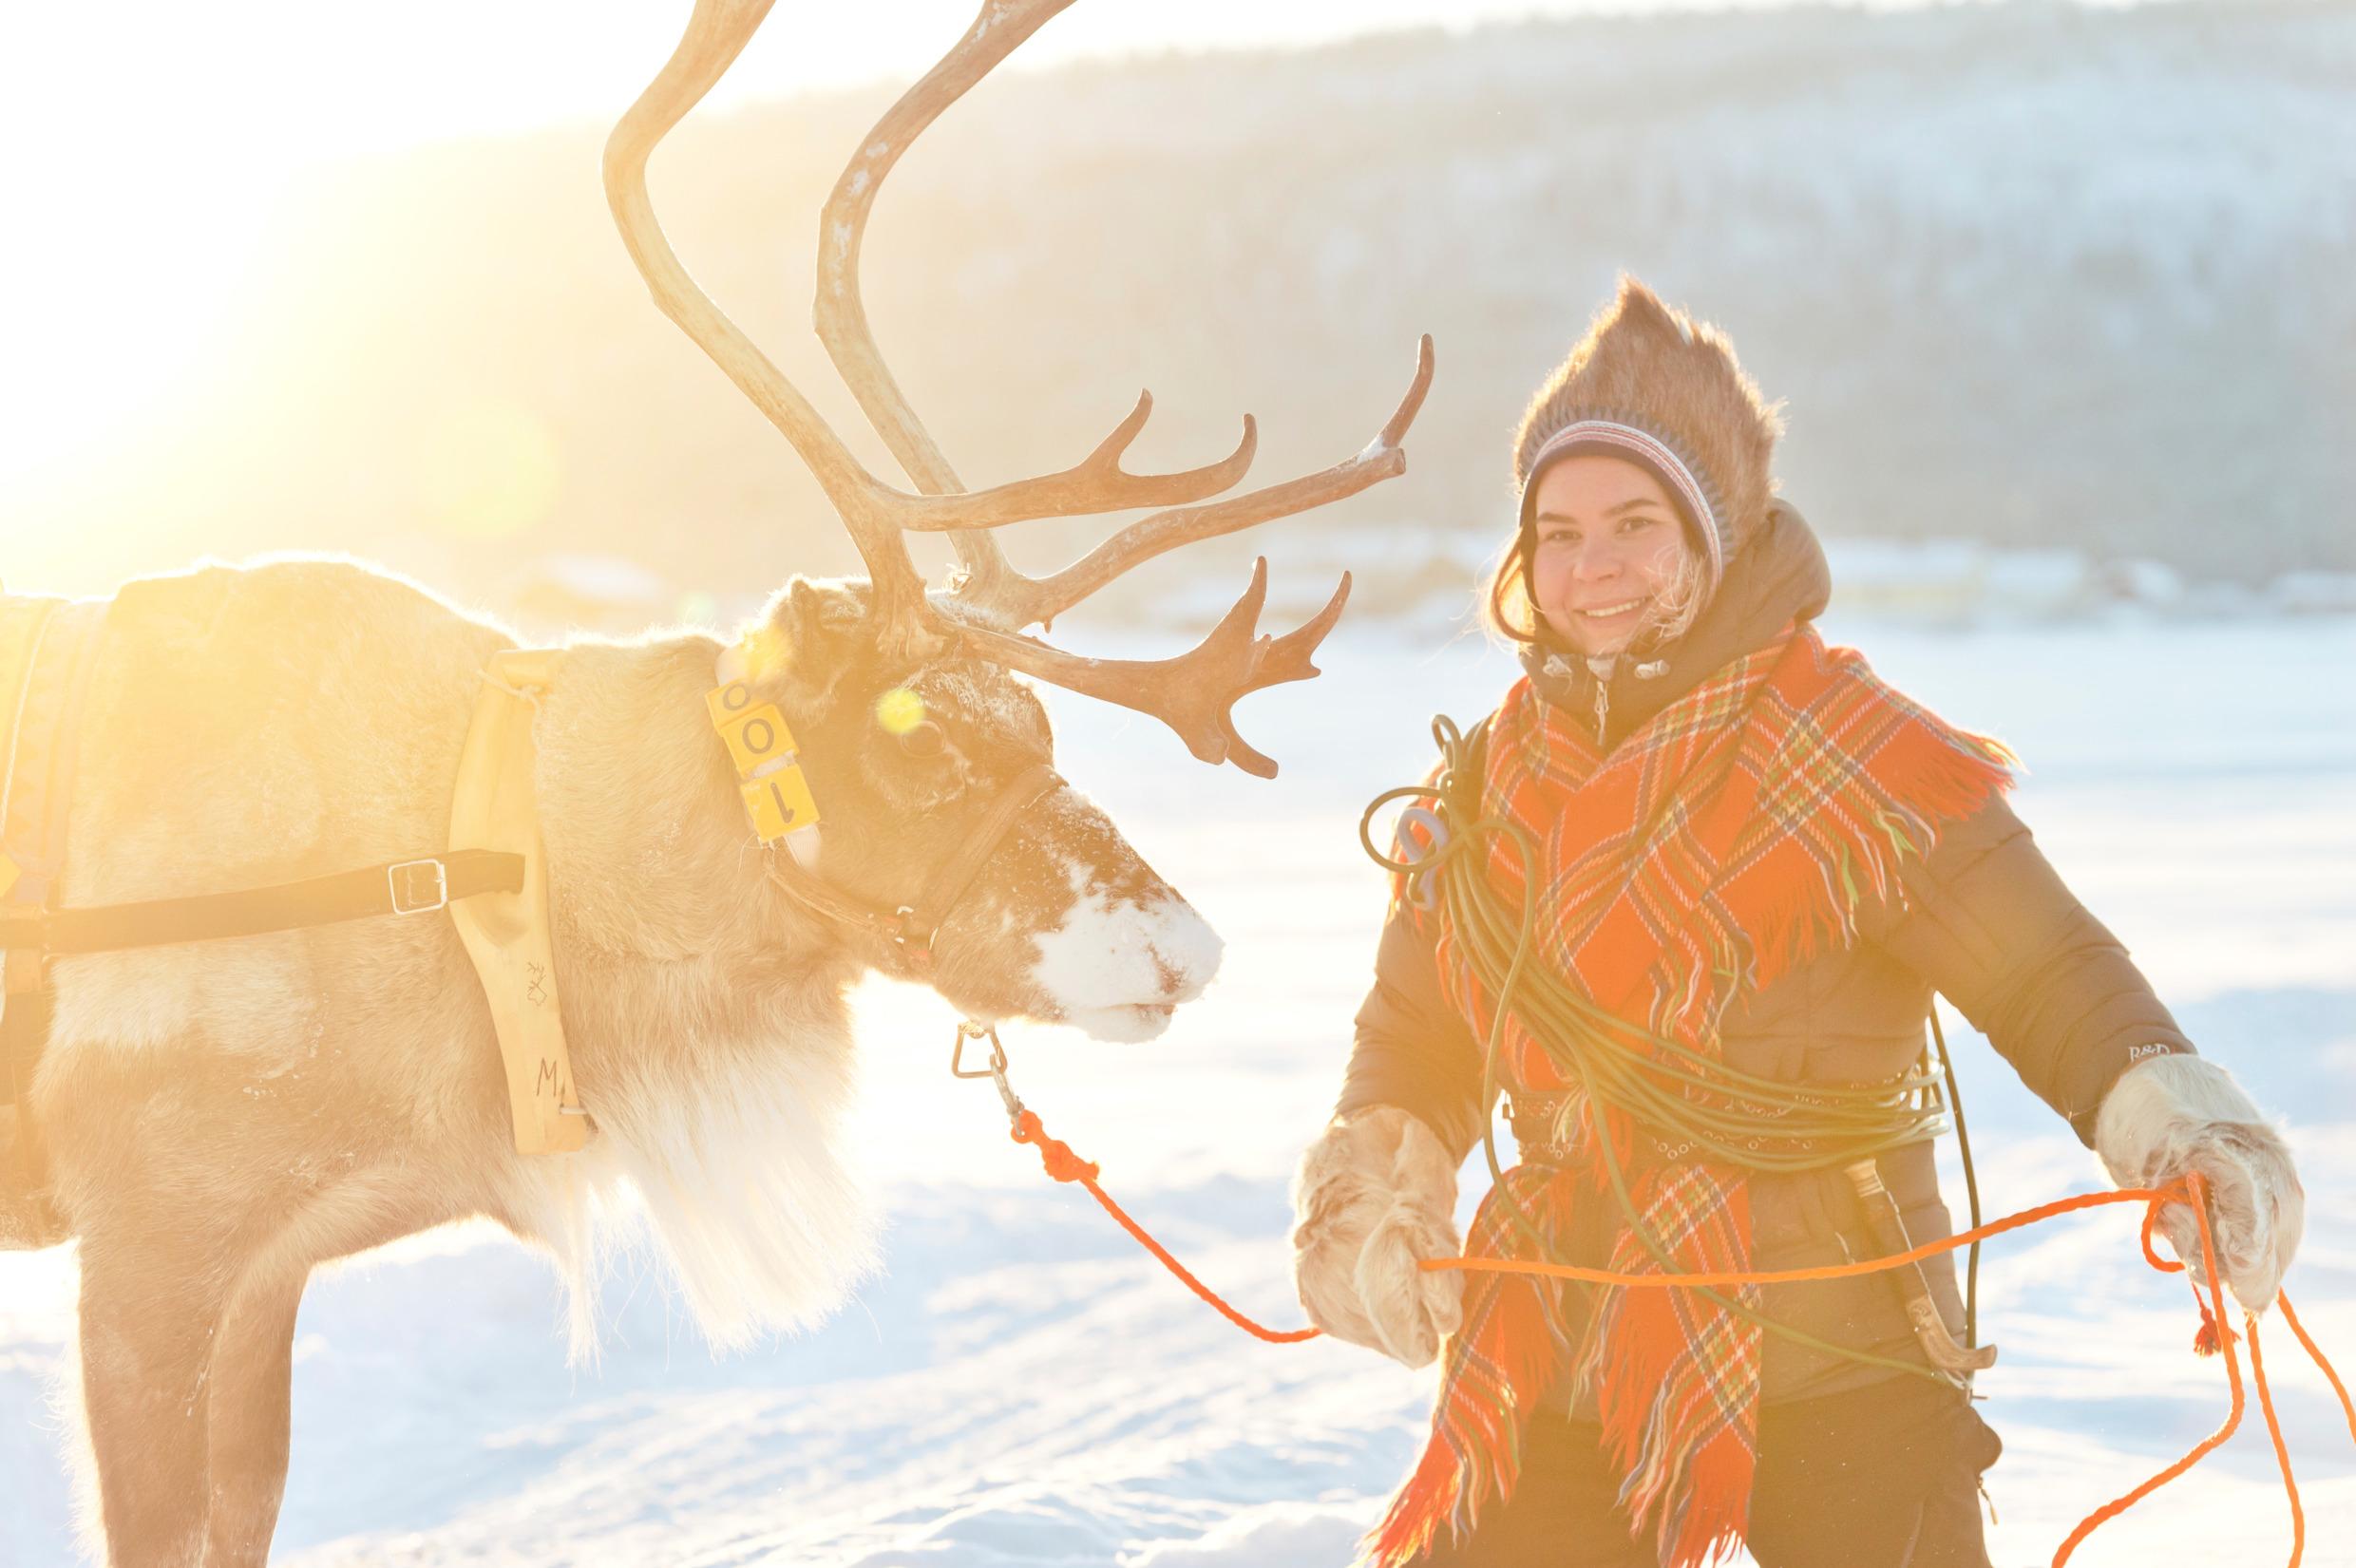 A Sami woman holding a reindeer by a leash, in snowy landscapes.